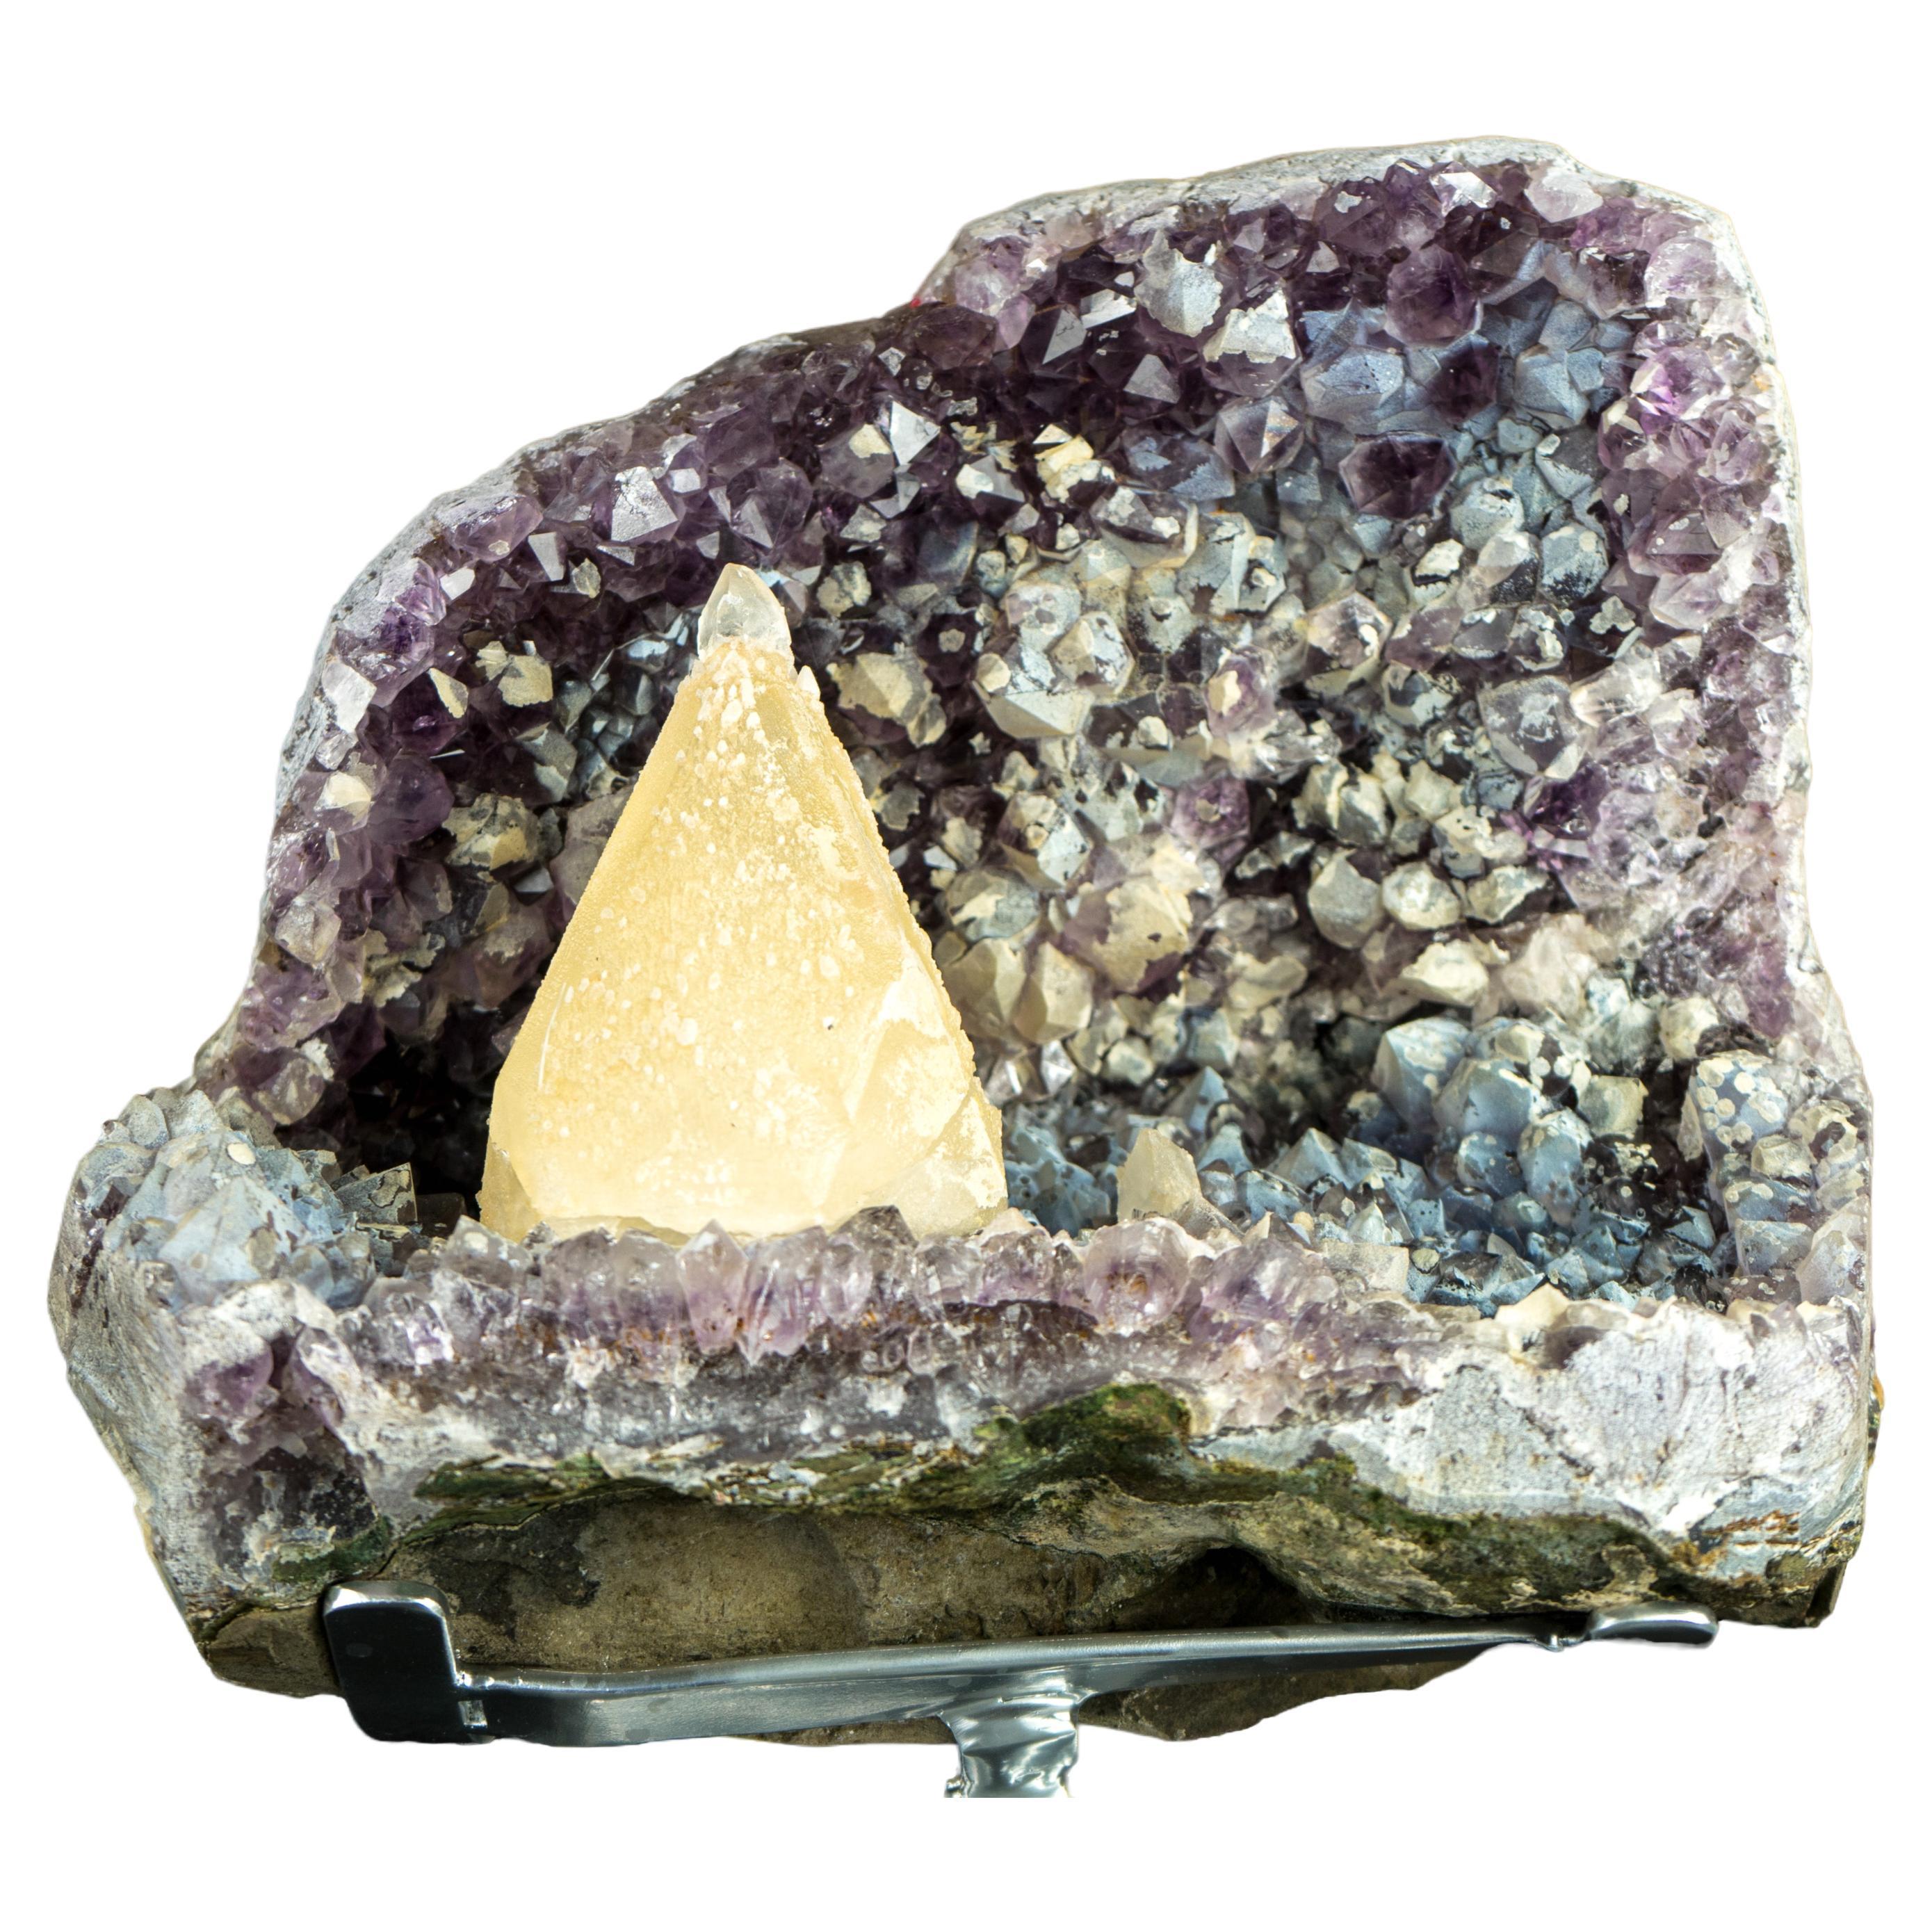 Calcite on Amethyst Specimen from the Toldinho Mine, Collector/Gallery Grade 